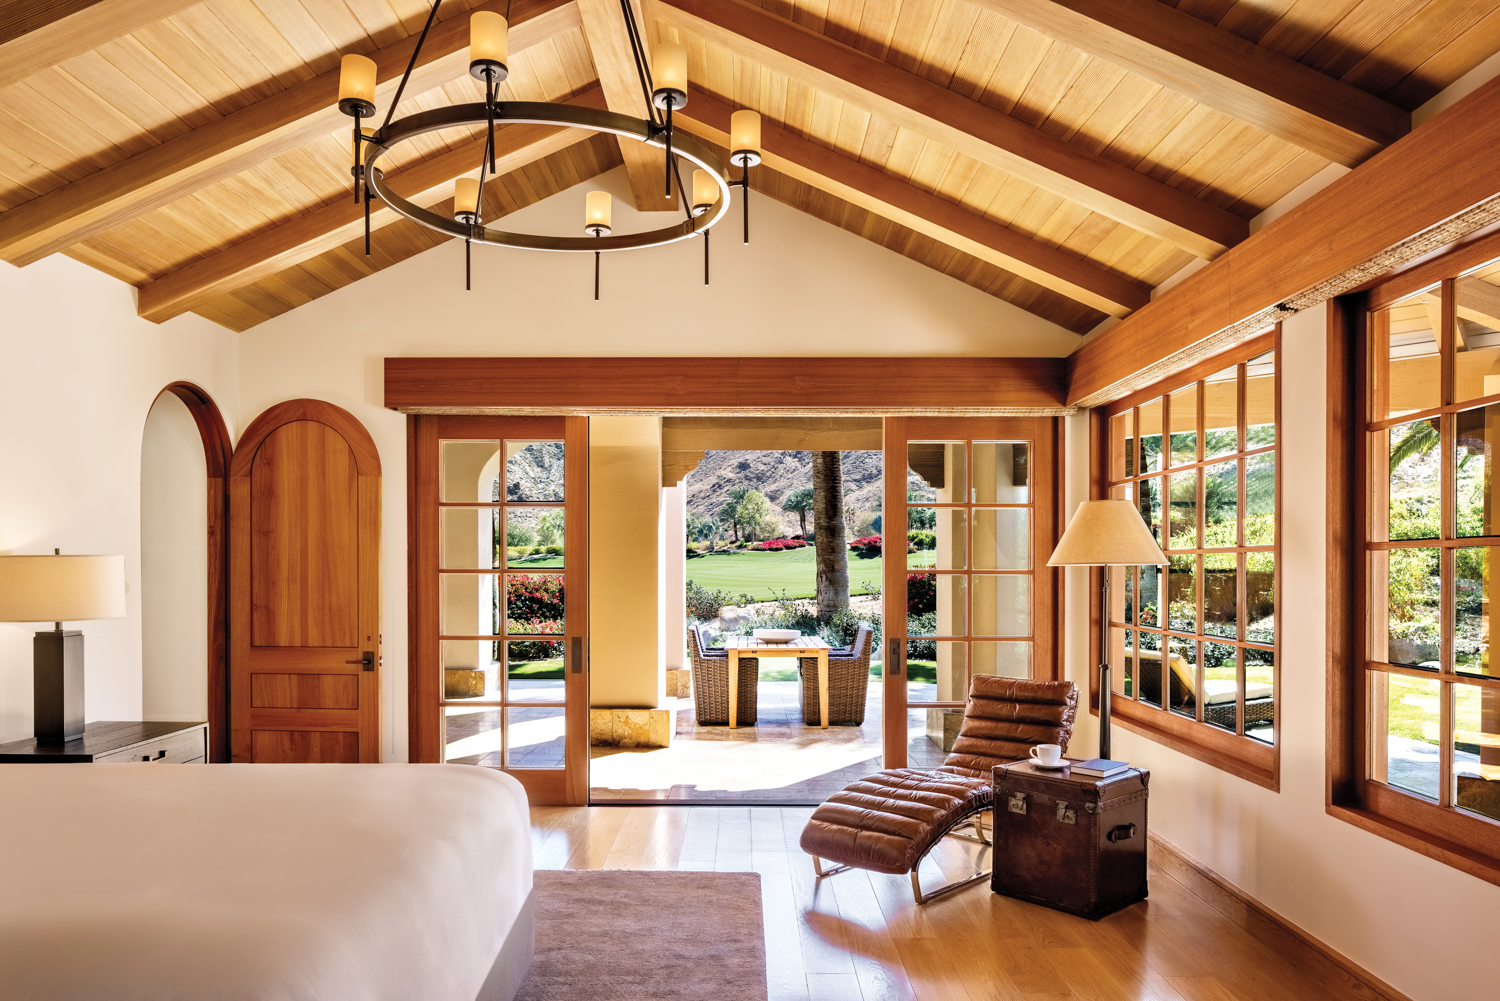 Channel A Sense Of Calm At This California Wellness Property